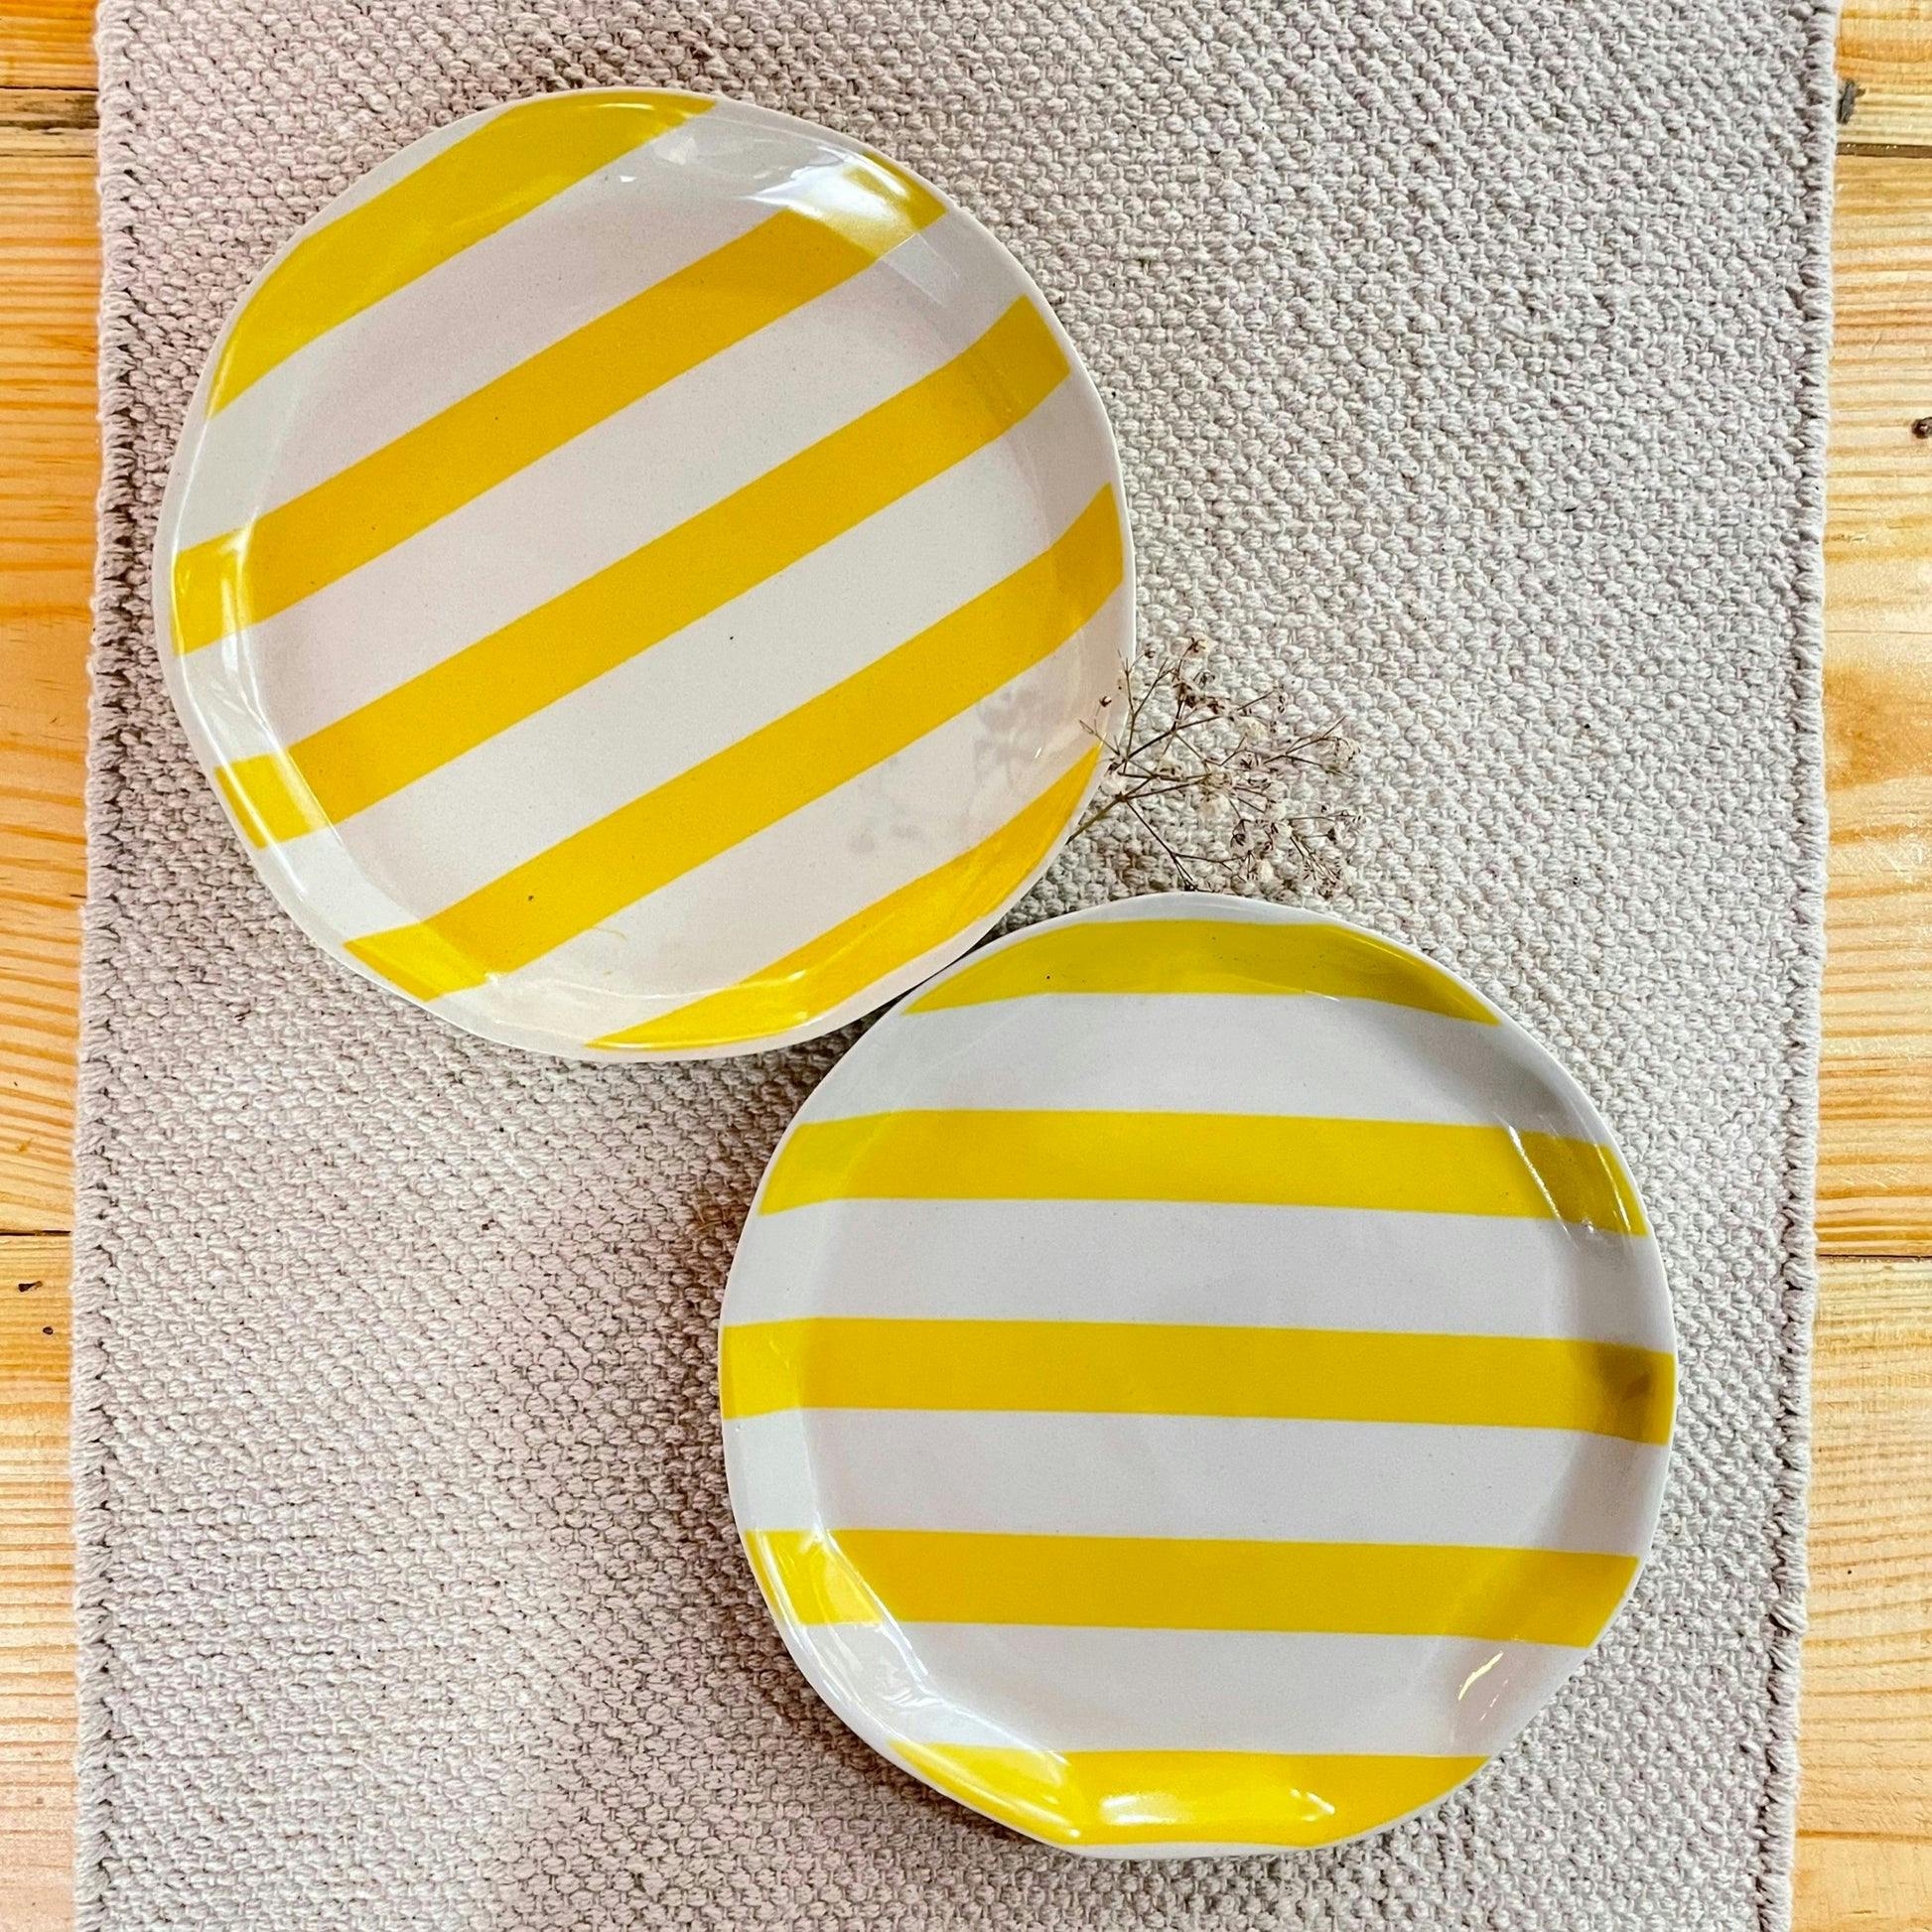 Striking Striped Plates (Set of 2) - Yellow, a product by Oh Yay project